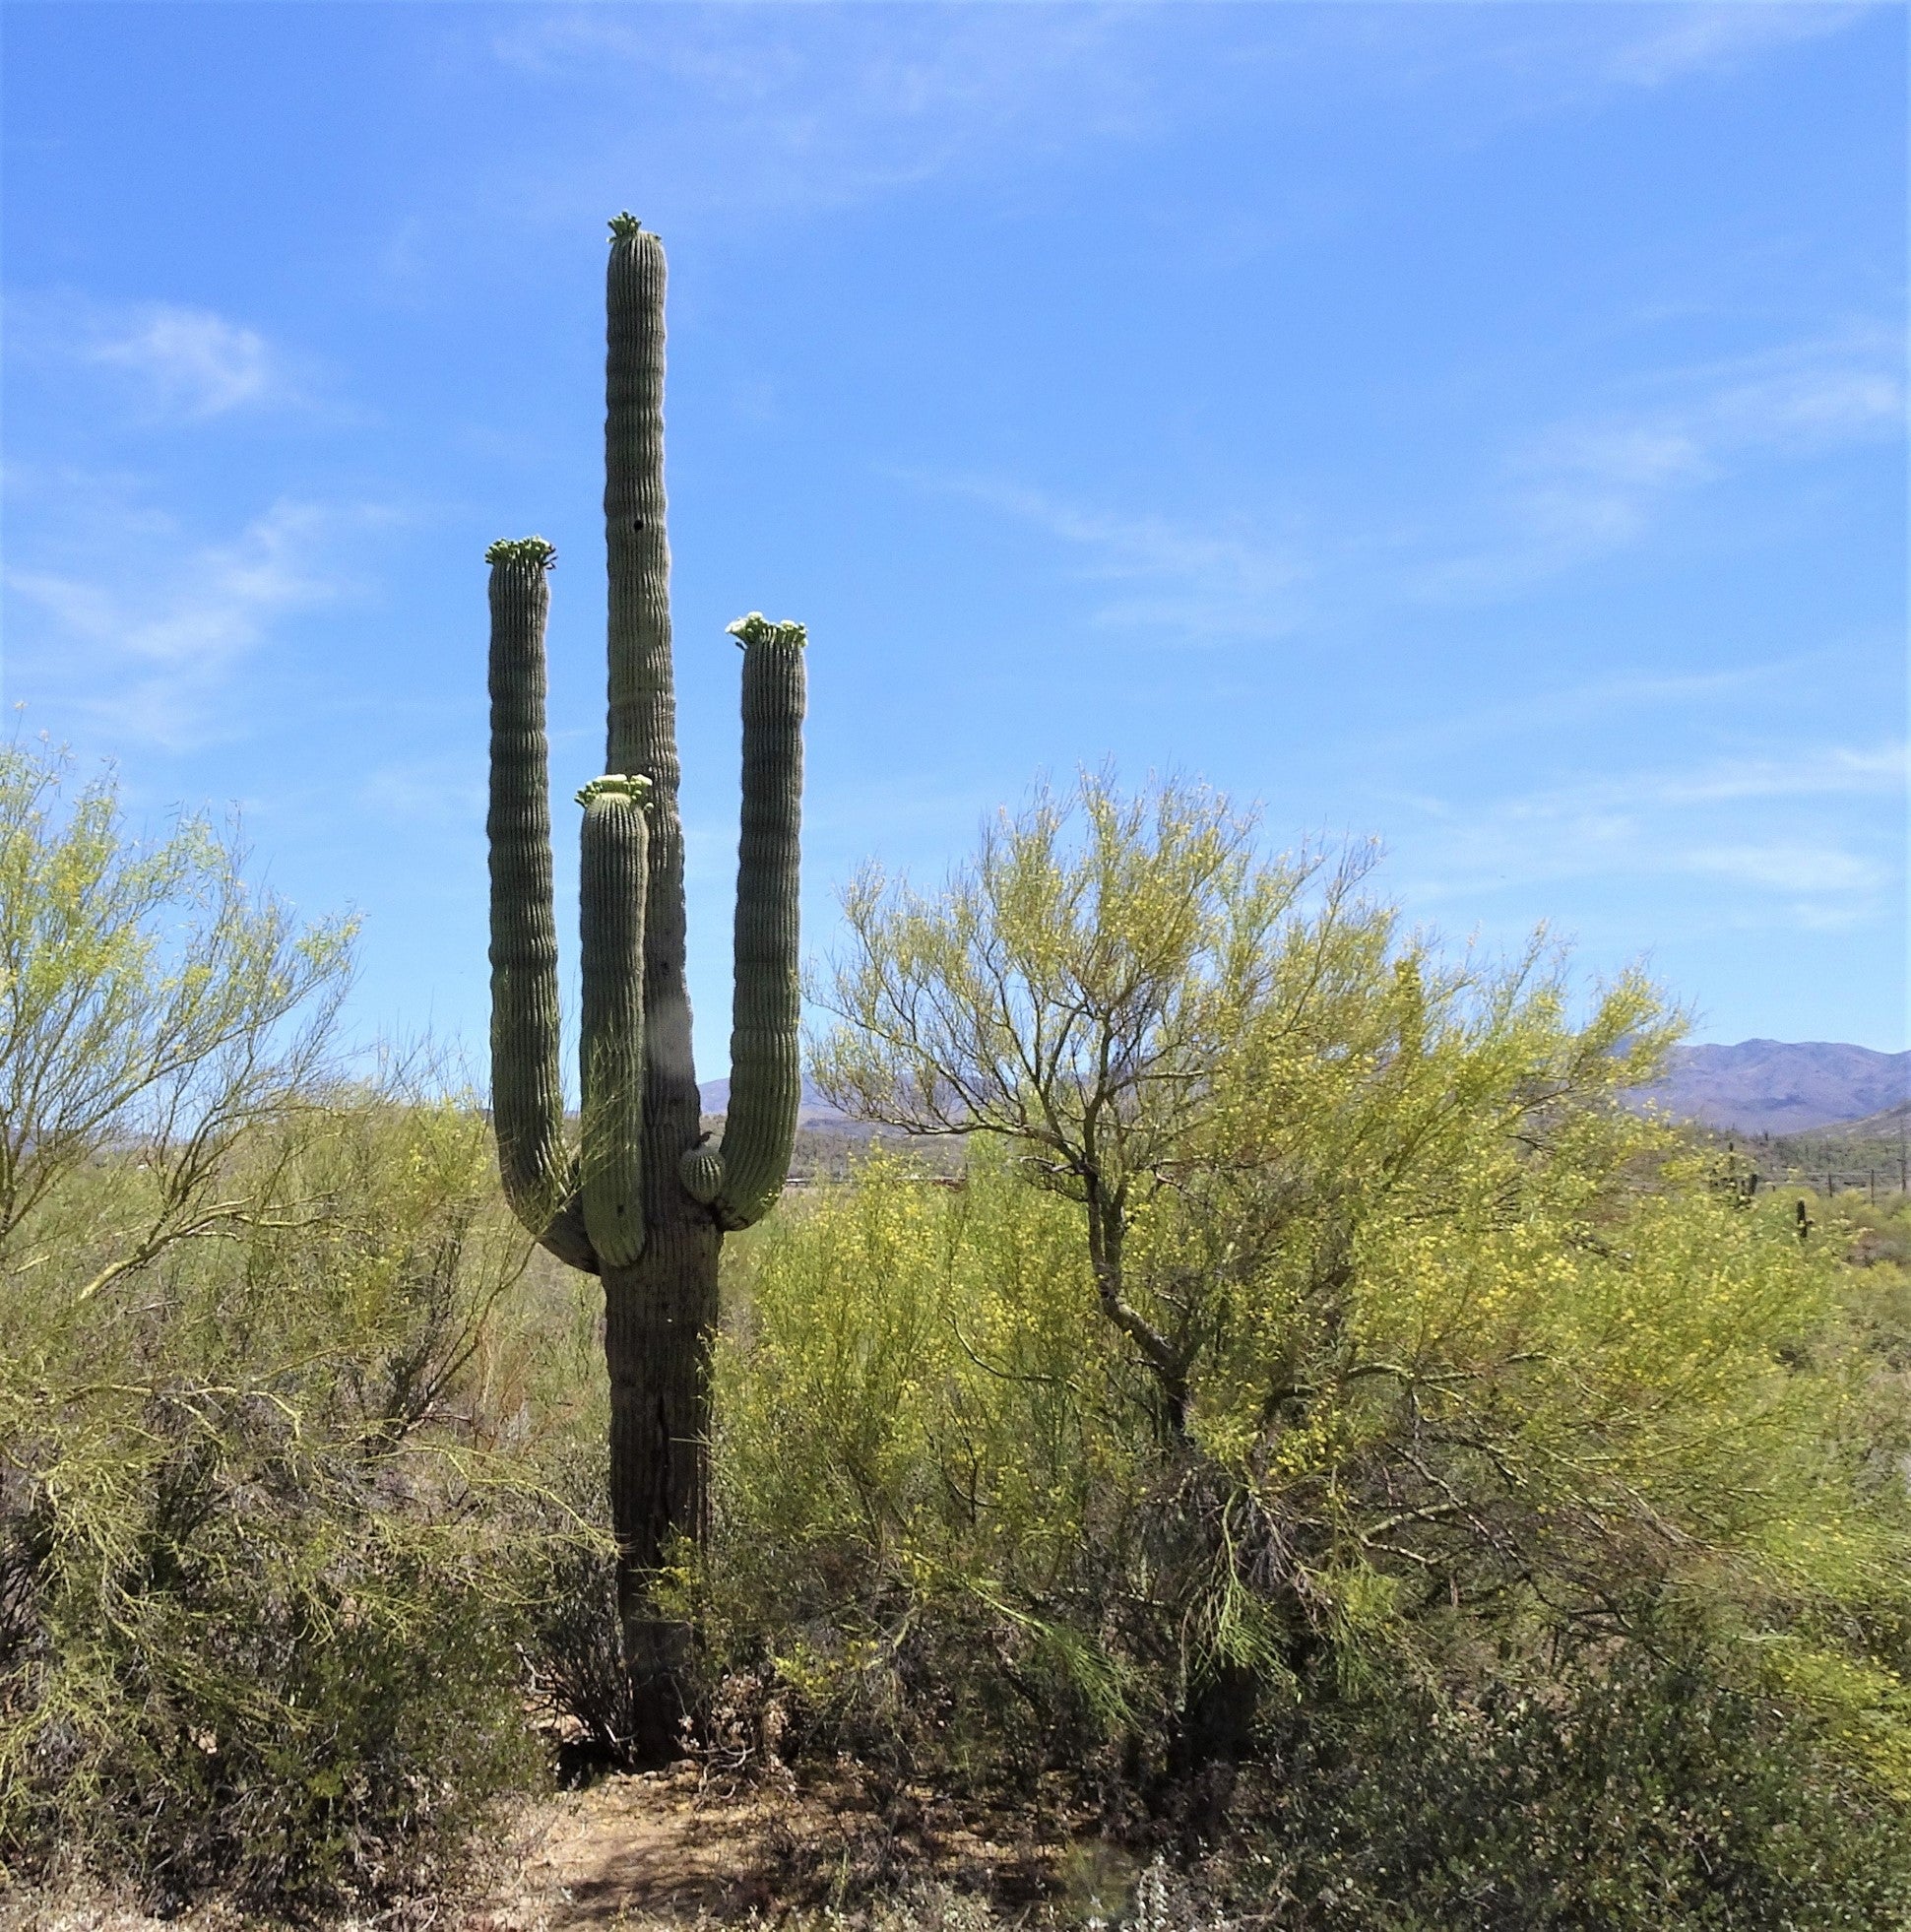 One saguaro in a field of small desert shrubs